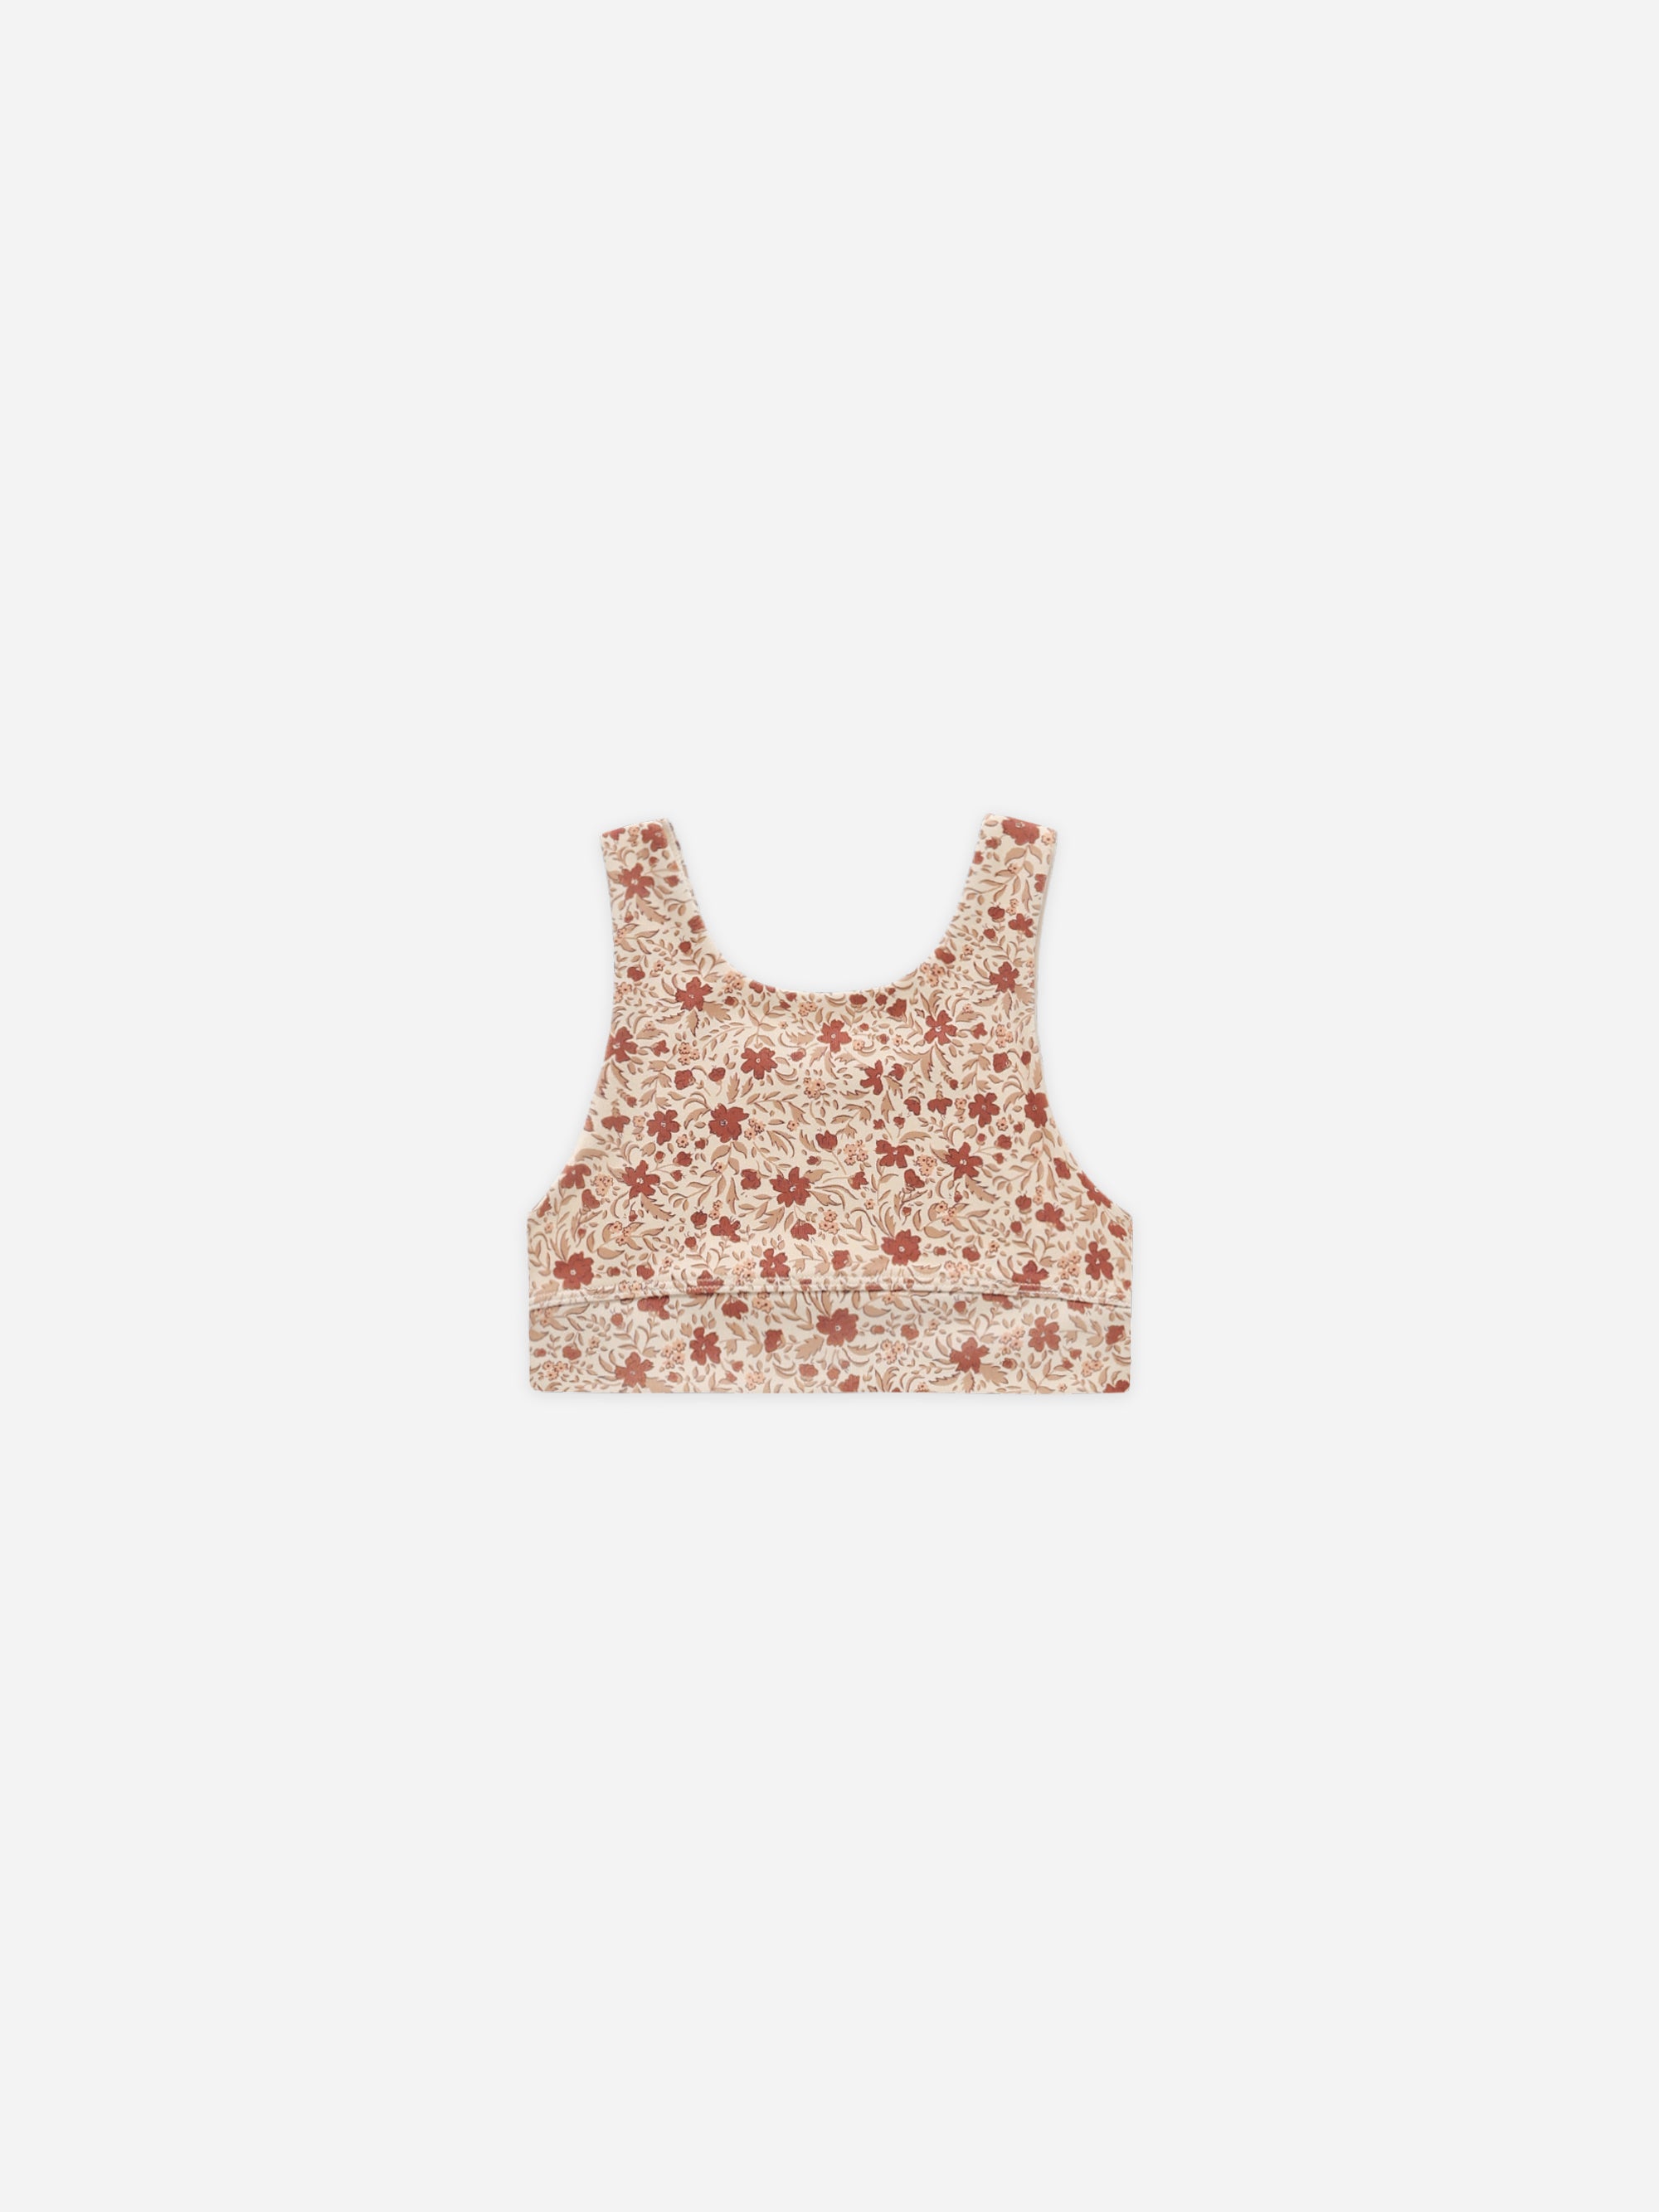 Swift Sports Bra || Fleur - Rylee + Cru | Kids Clothes | Trendy Baby Clothes | Modern Infant Outfits |